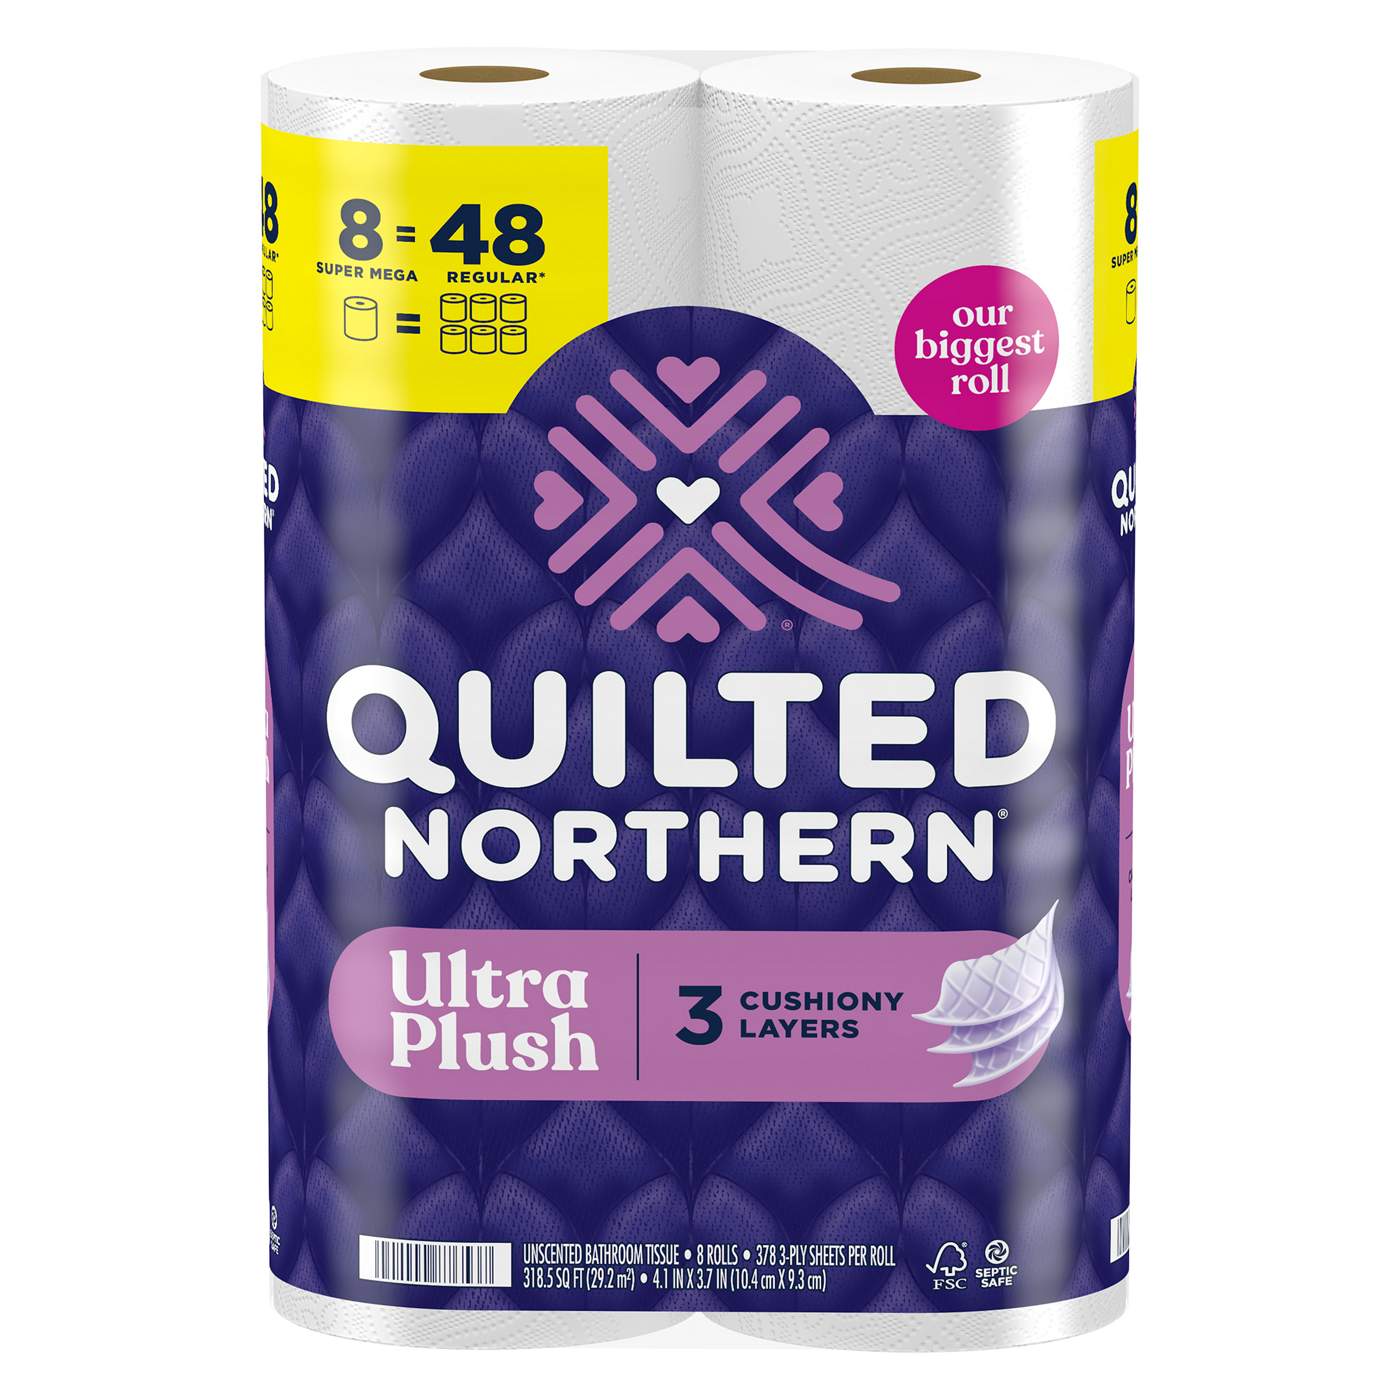 Quilted Northern Ultra Plush Toilet Paper; image 1 of 2